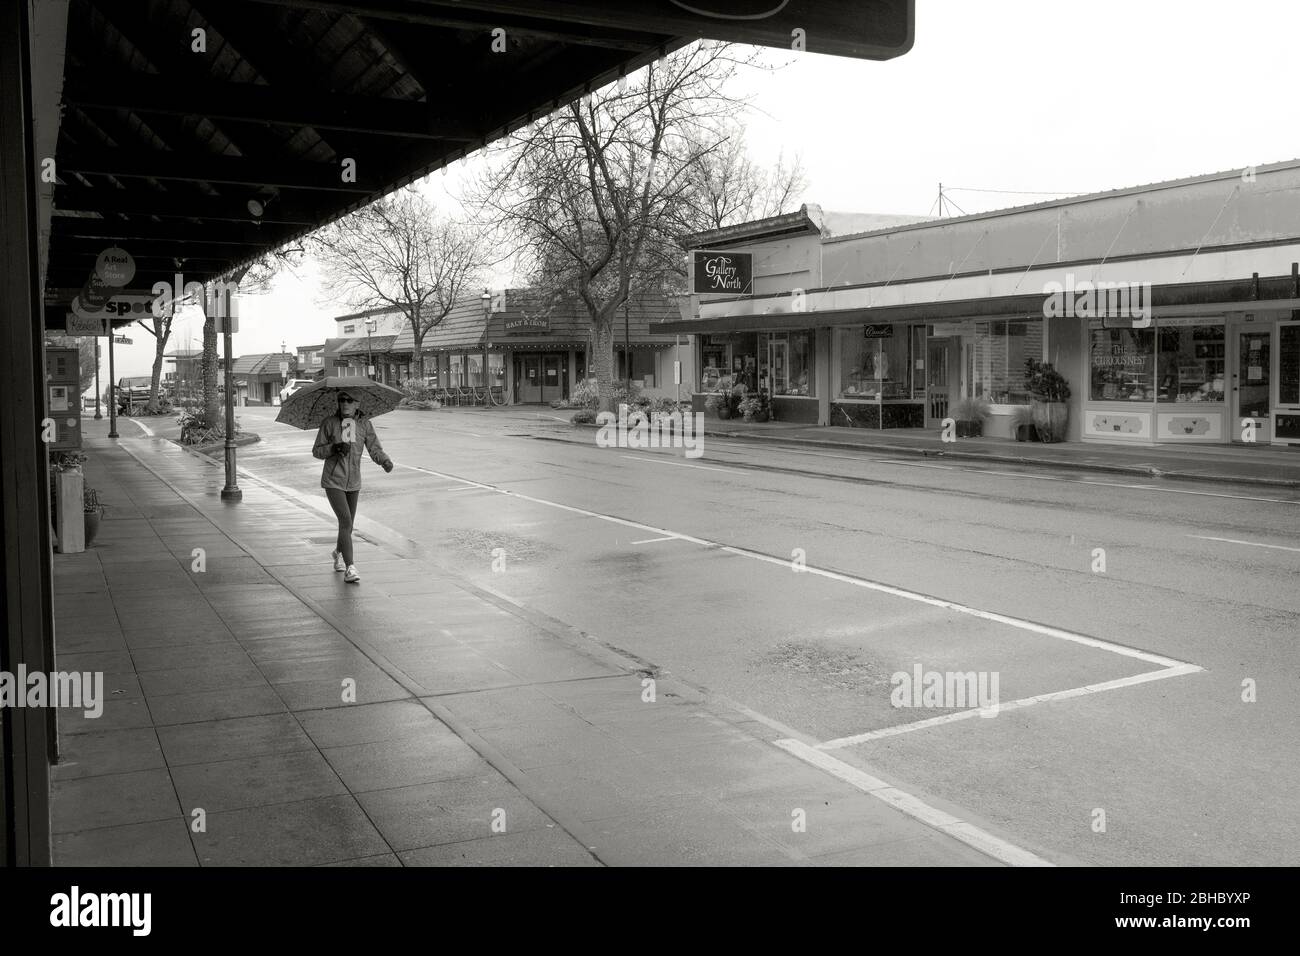 WA17459-00-BW....WASHINGTON - Rainy day with near empty streets and closed shops in Edmonds during the 2020  COVID 19 outbreak. Stock Photo